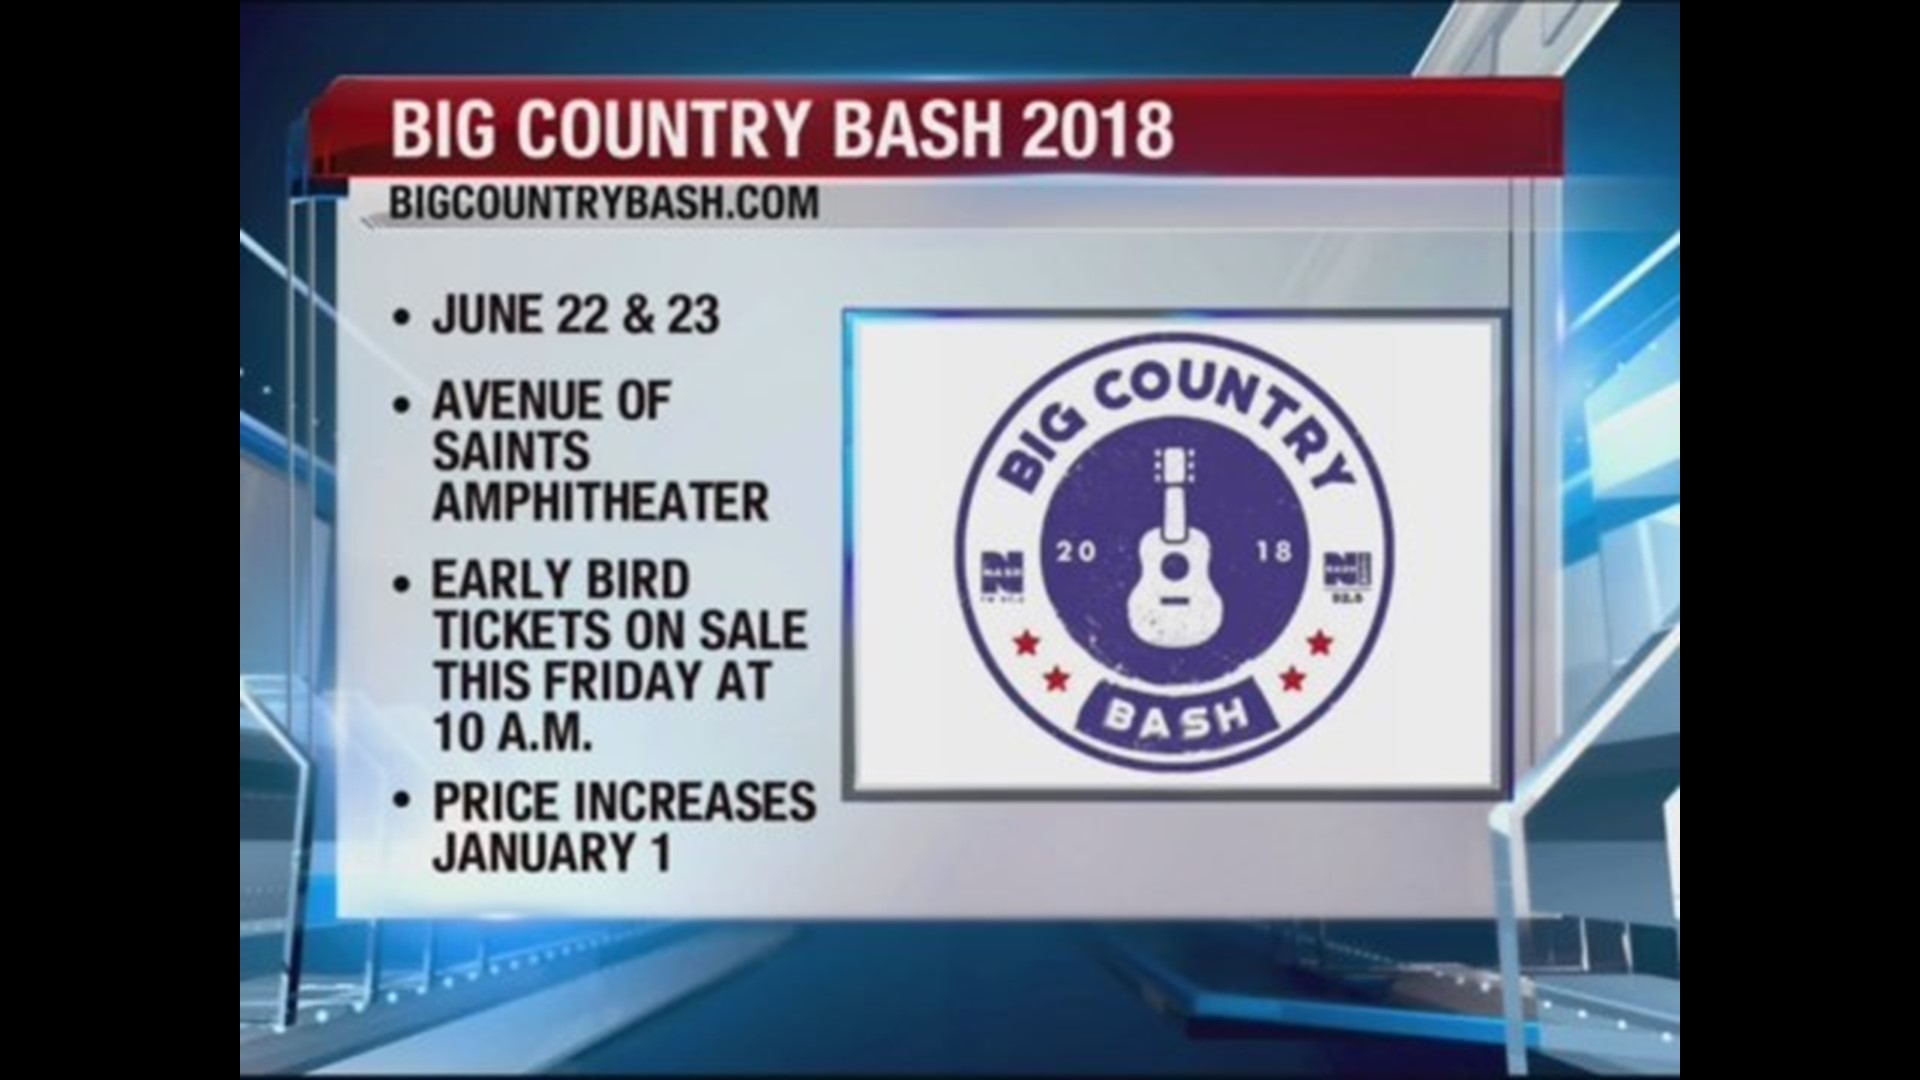 Big Country Bash announcements!